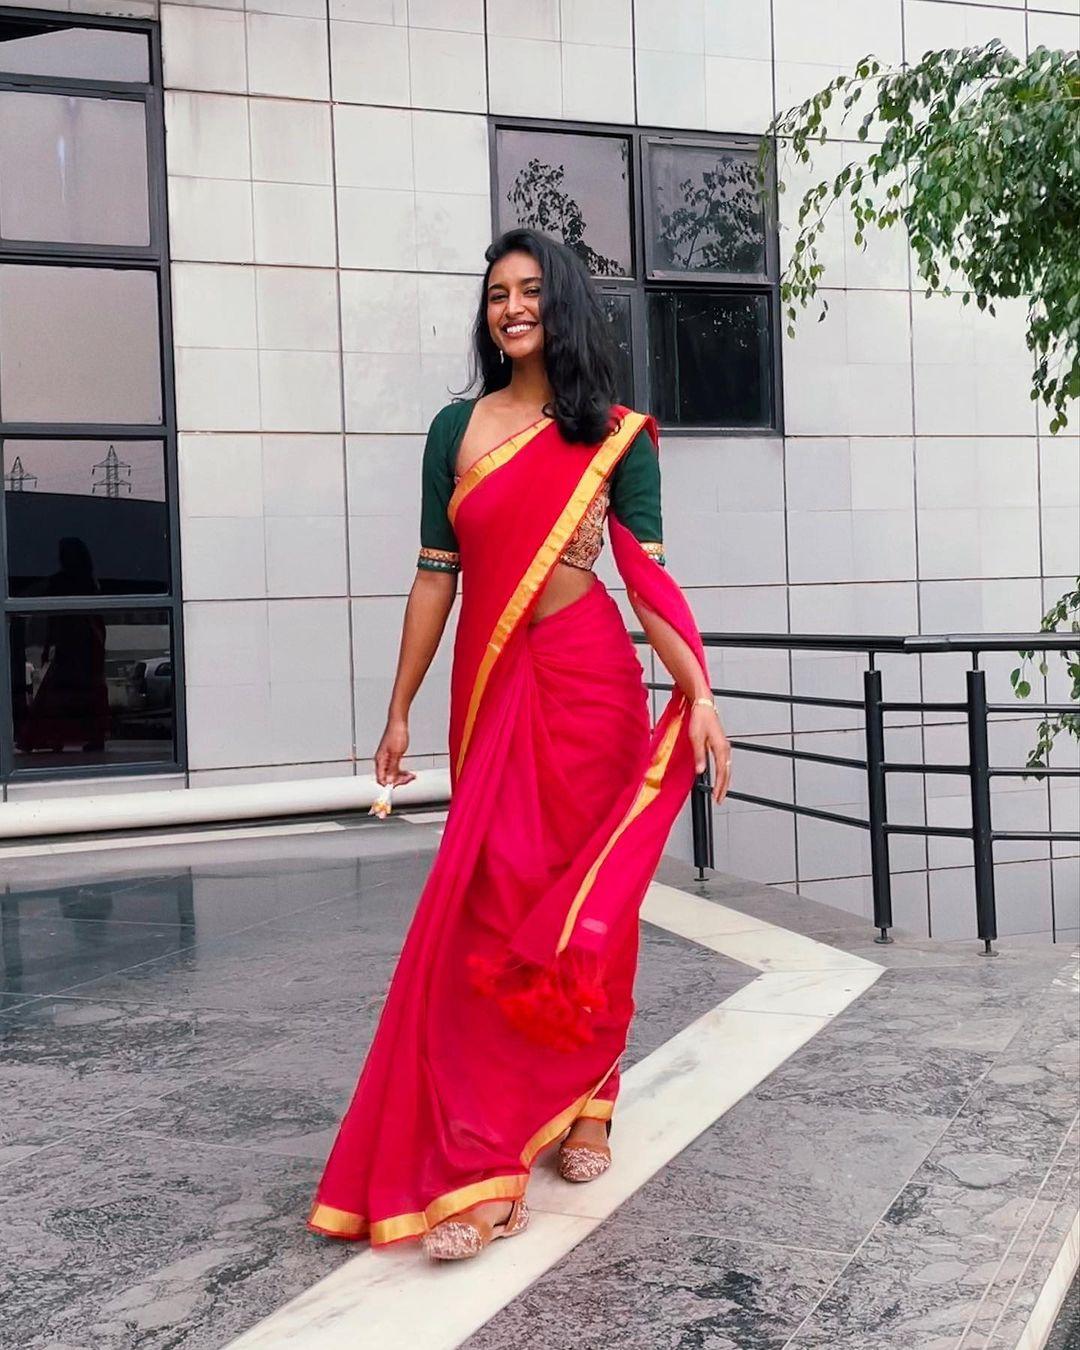 Photoshoot Poses For Girls In Saree # Model Photoshoot Outdoor # Red Saree  Photoshoot #Miya - YouTube